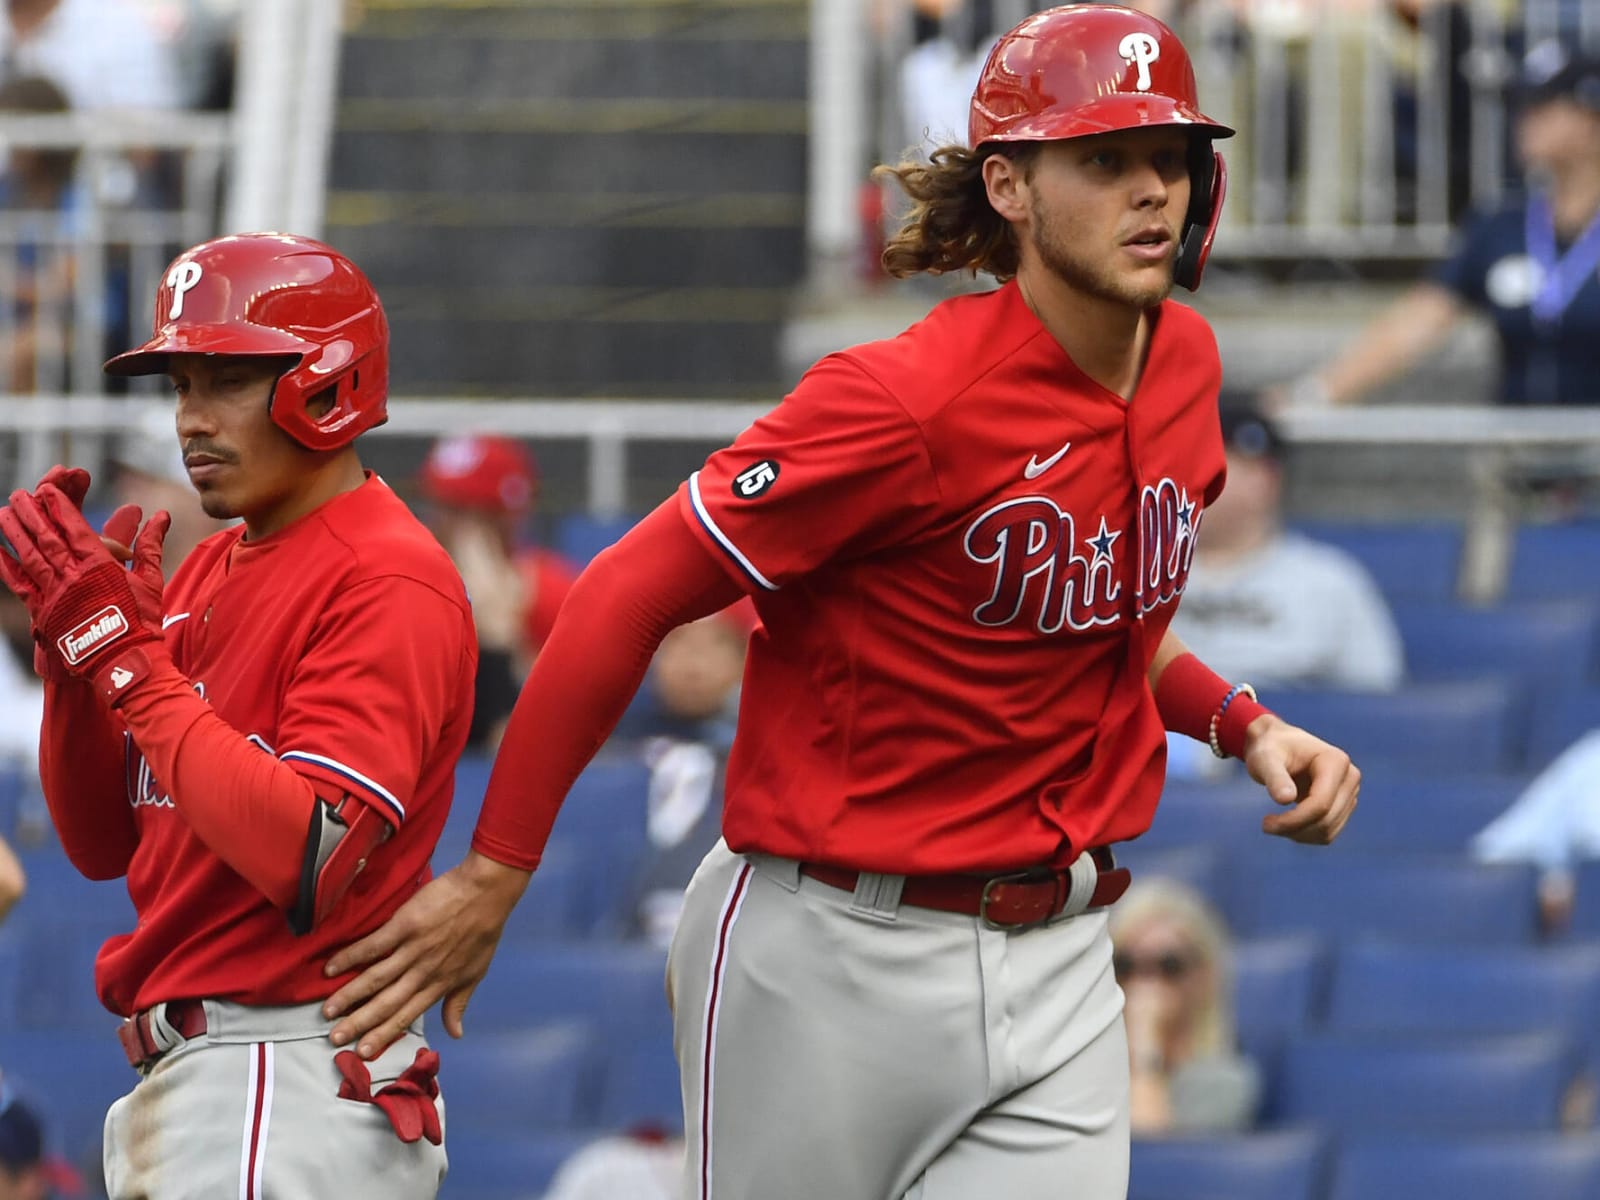 Alec Bohm wins back Phillies fans after declaring, 'I hate this f